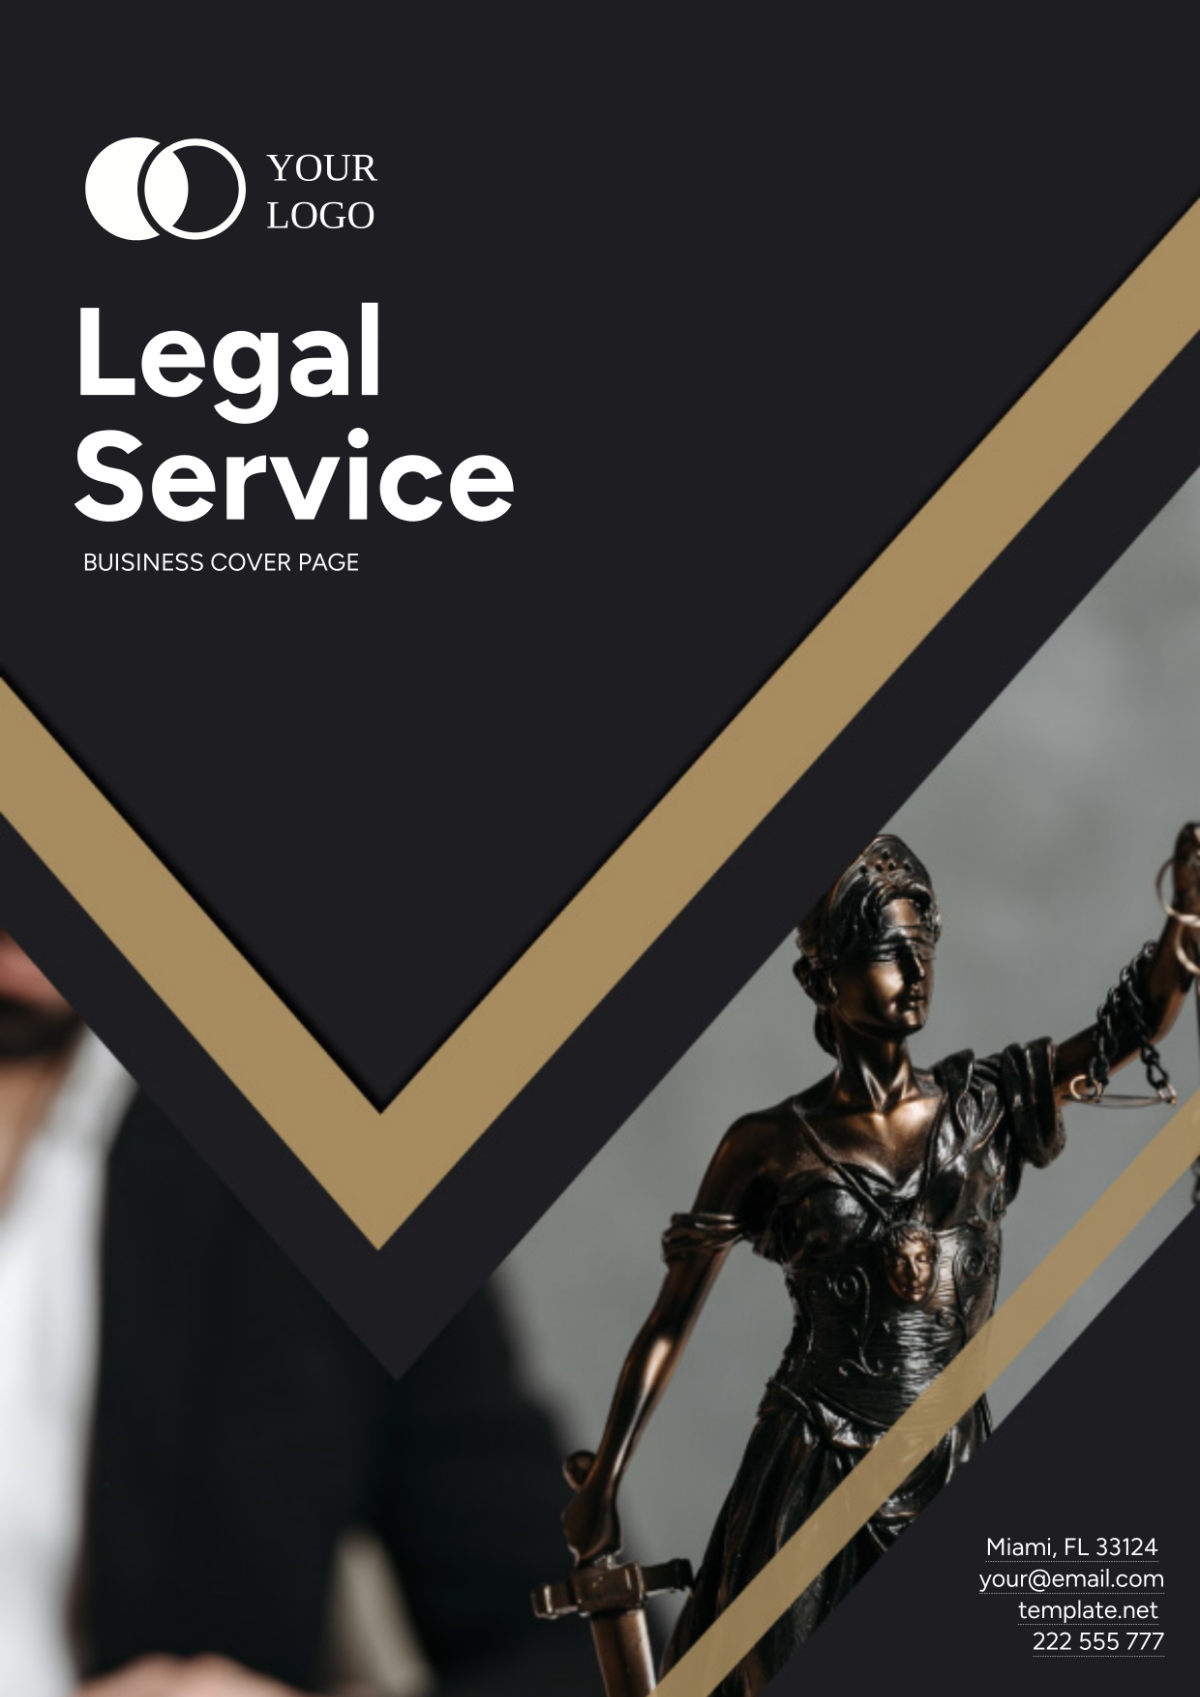 Legal Services Business Cover Page